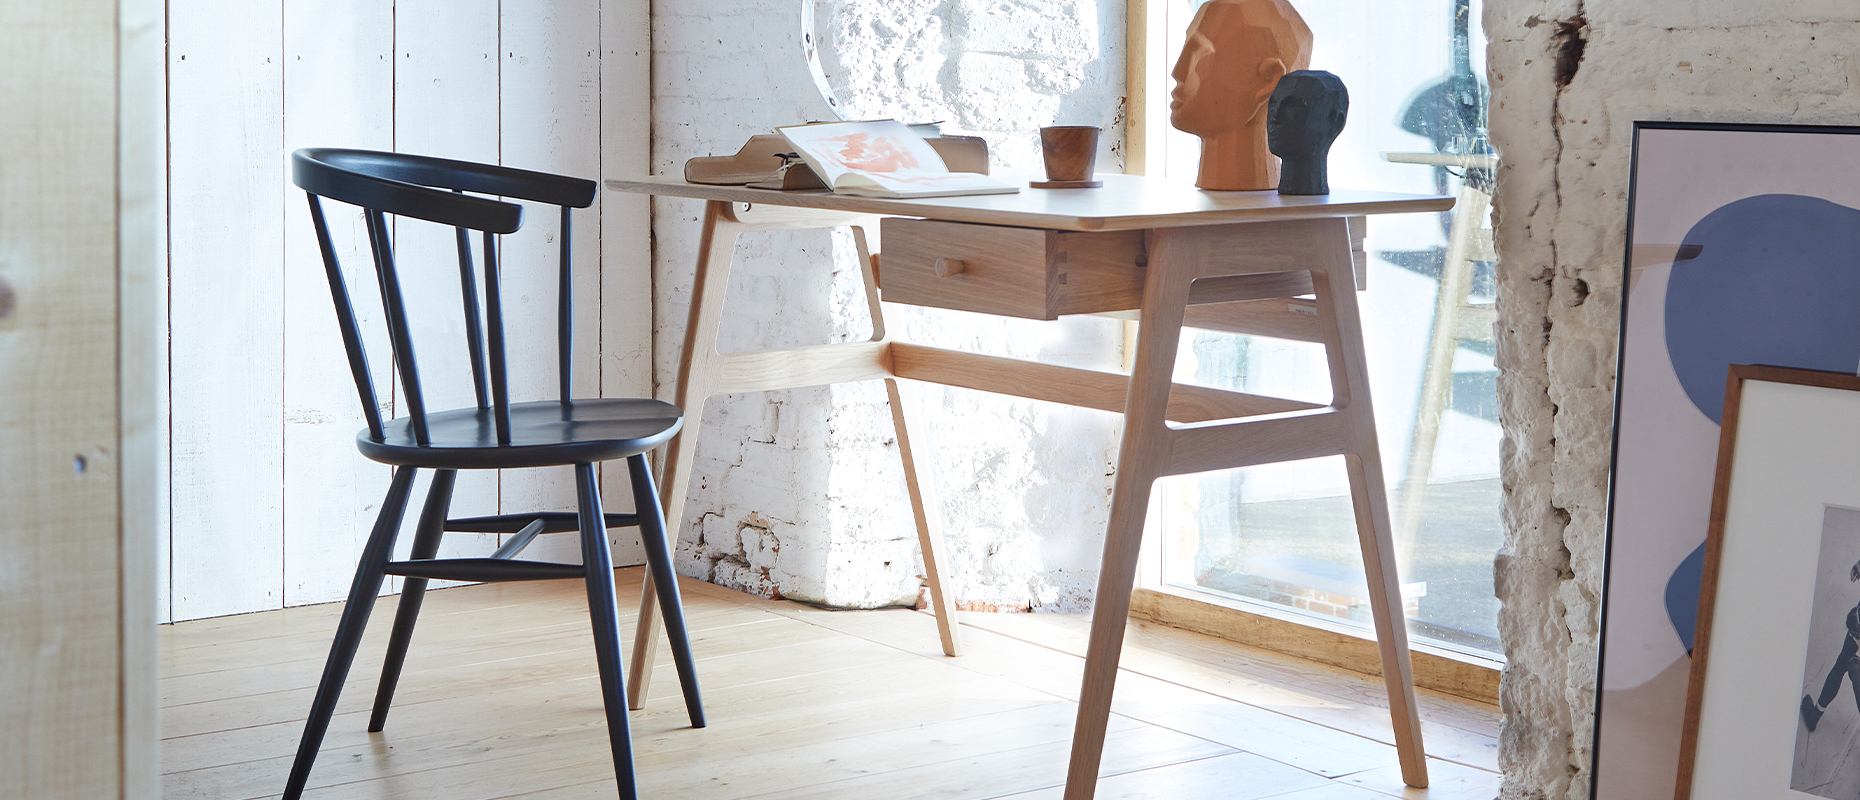 Ballatta Occasional collection by ercol at Forrest Furnishing